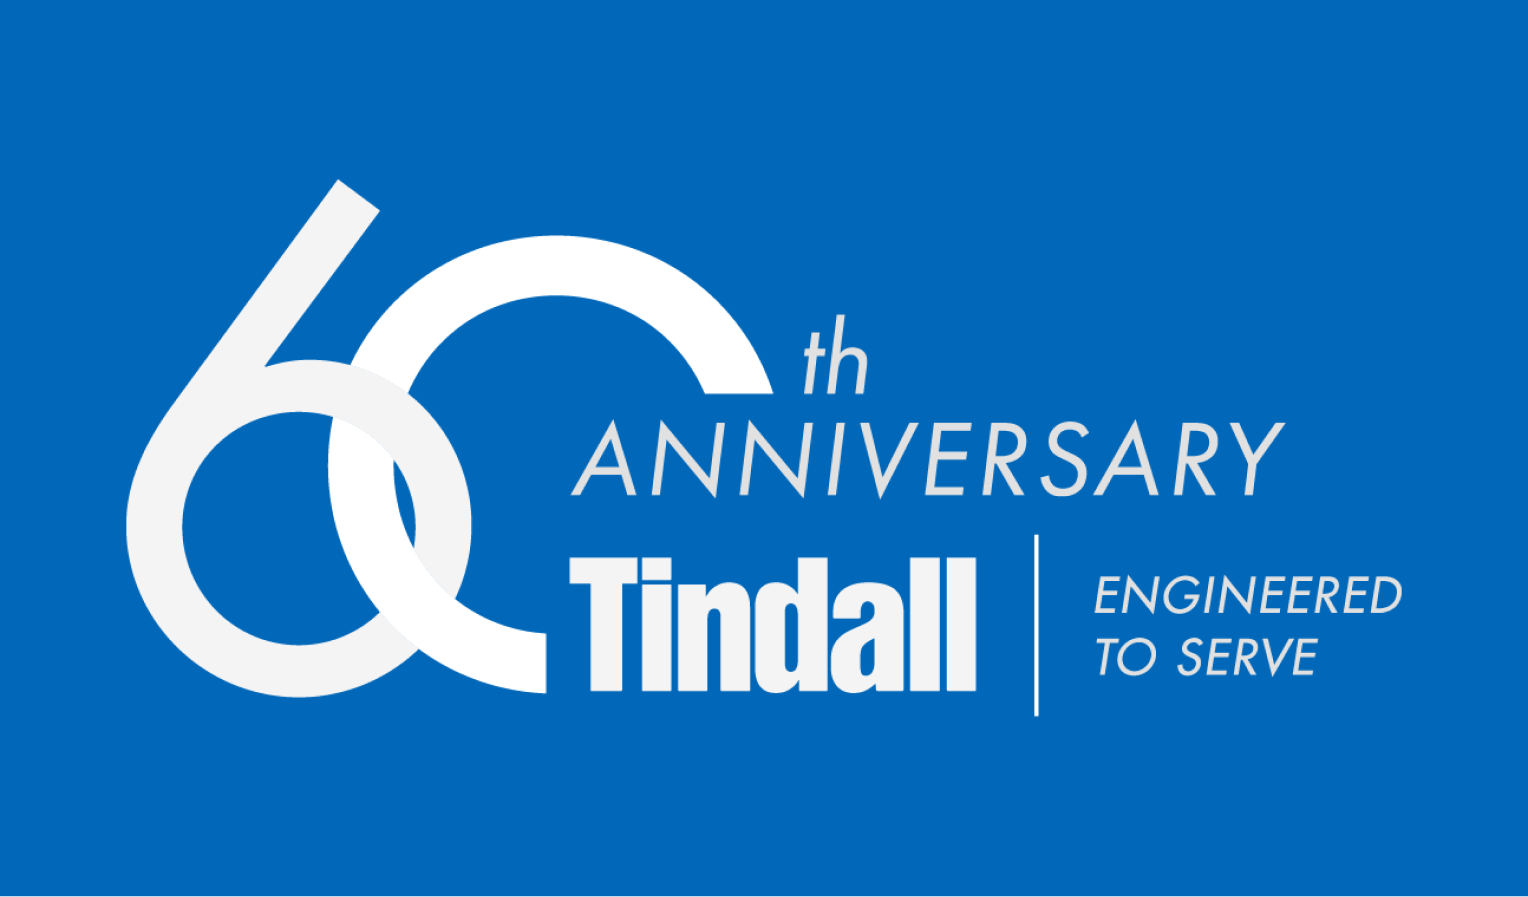 Tindall's 60th anniversary logo with slogan reading: "Engineered to Serve."